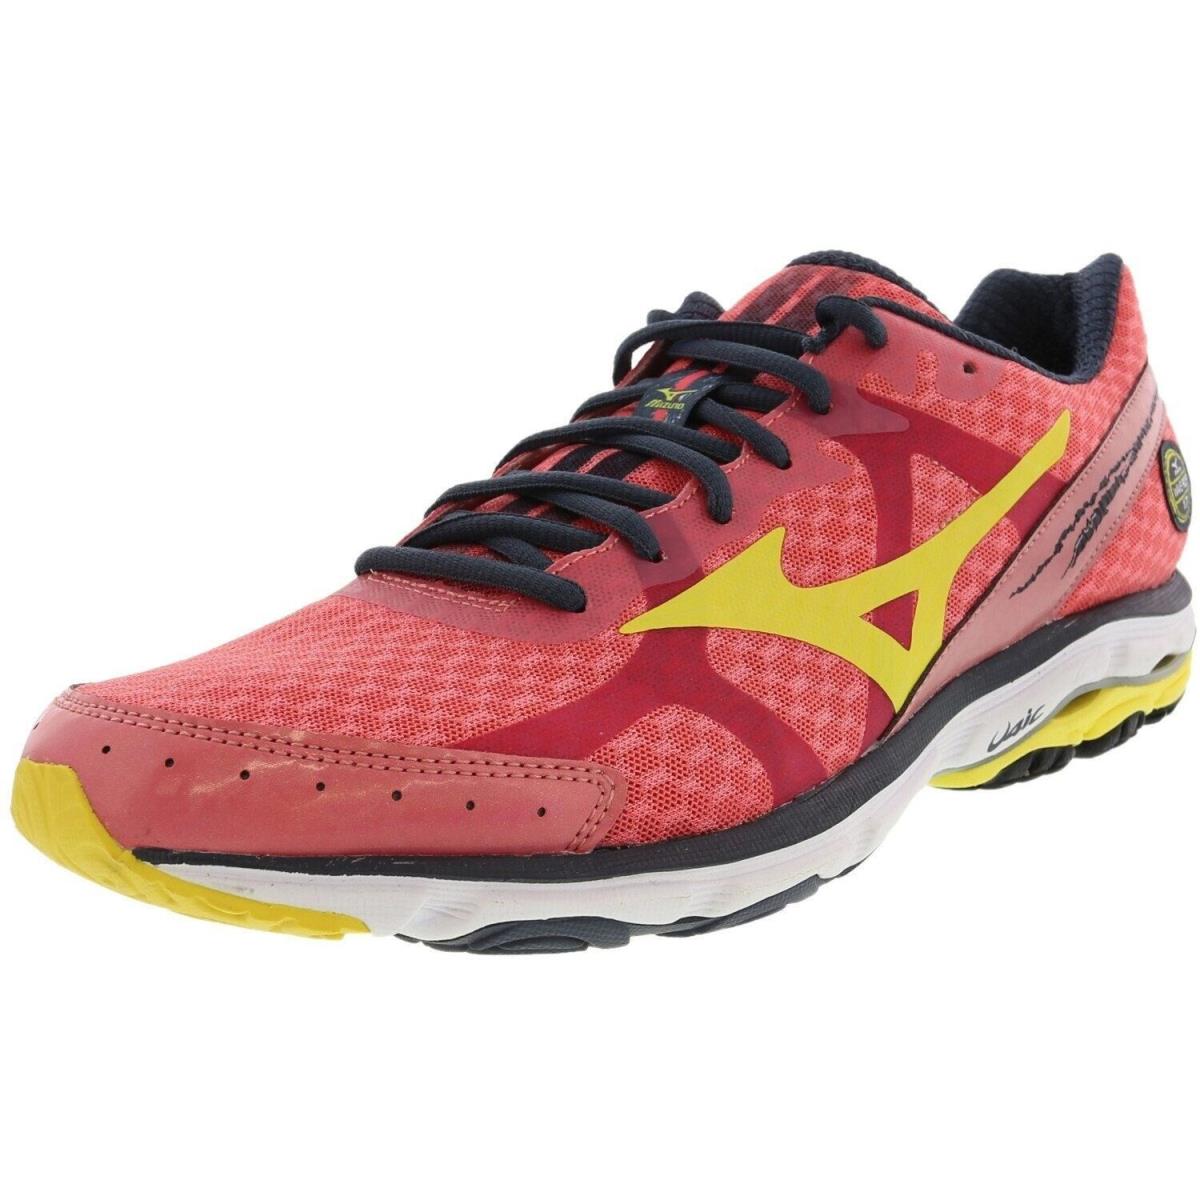 Mizuno Womens Wave Rider 17 Mesh Lace up Running Shoes Pink - Size 9